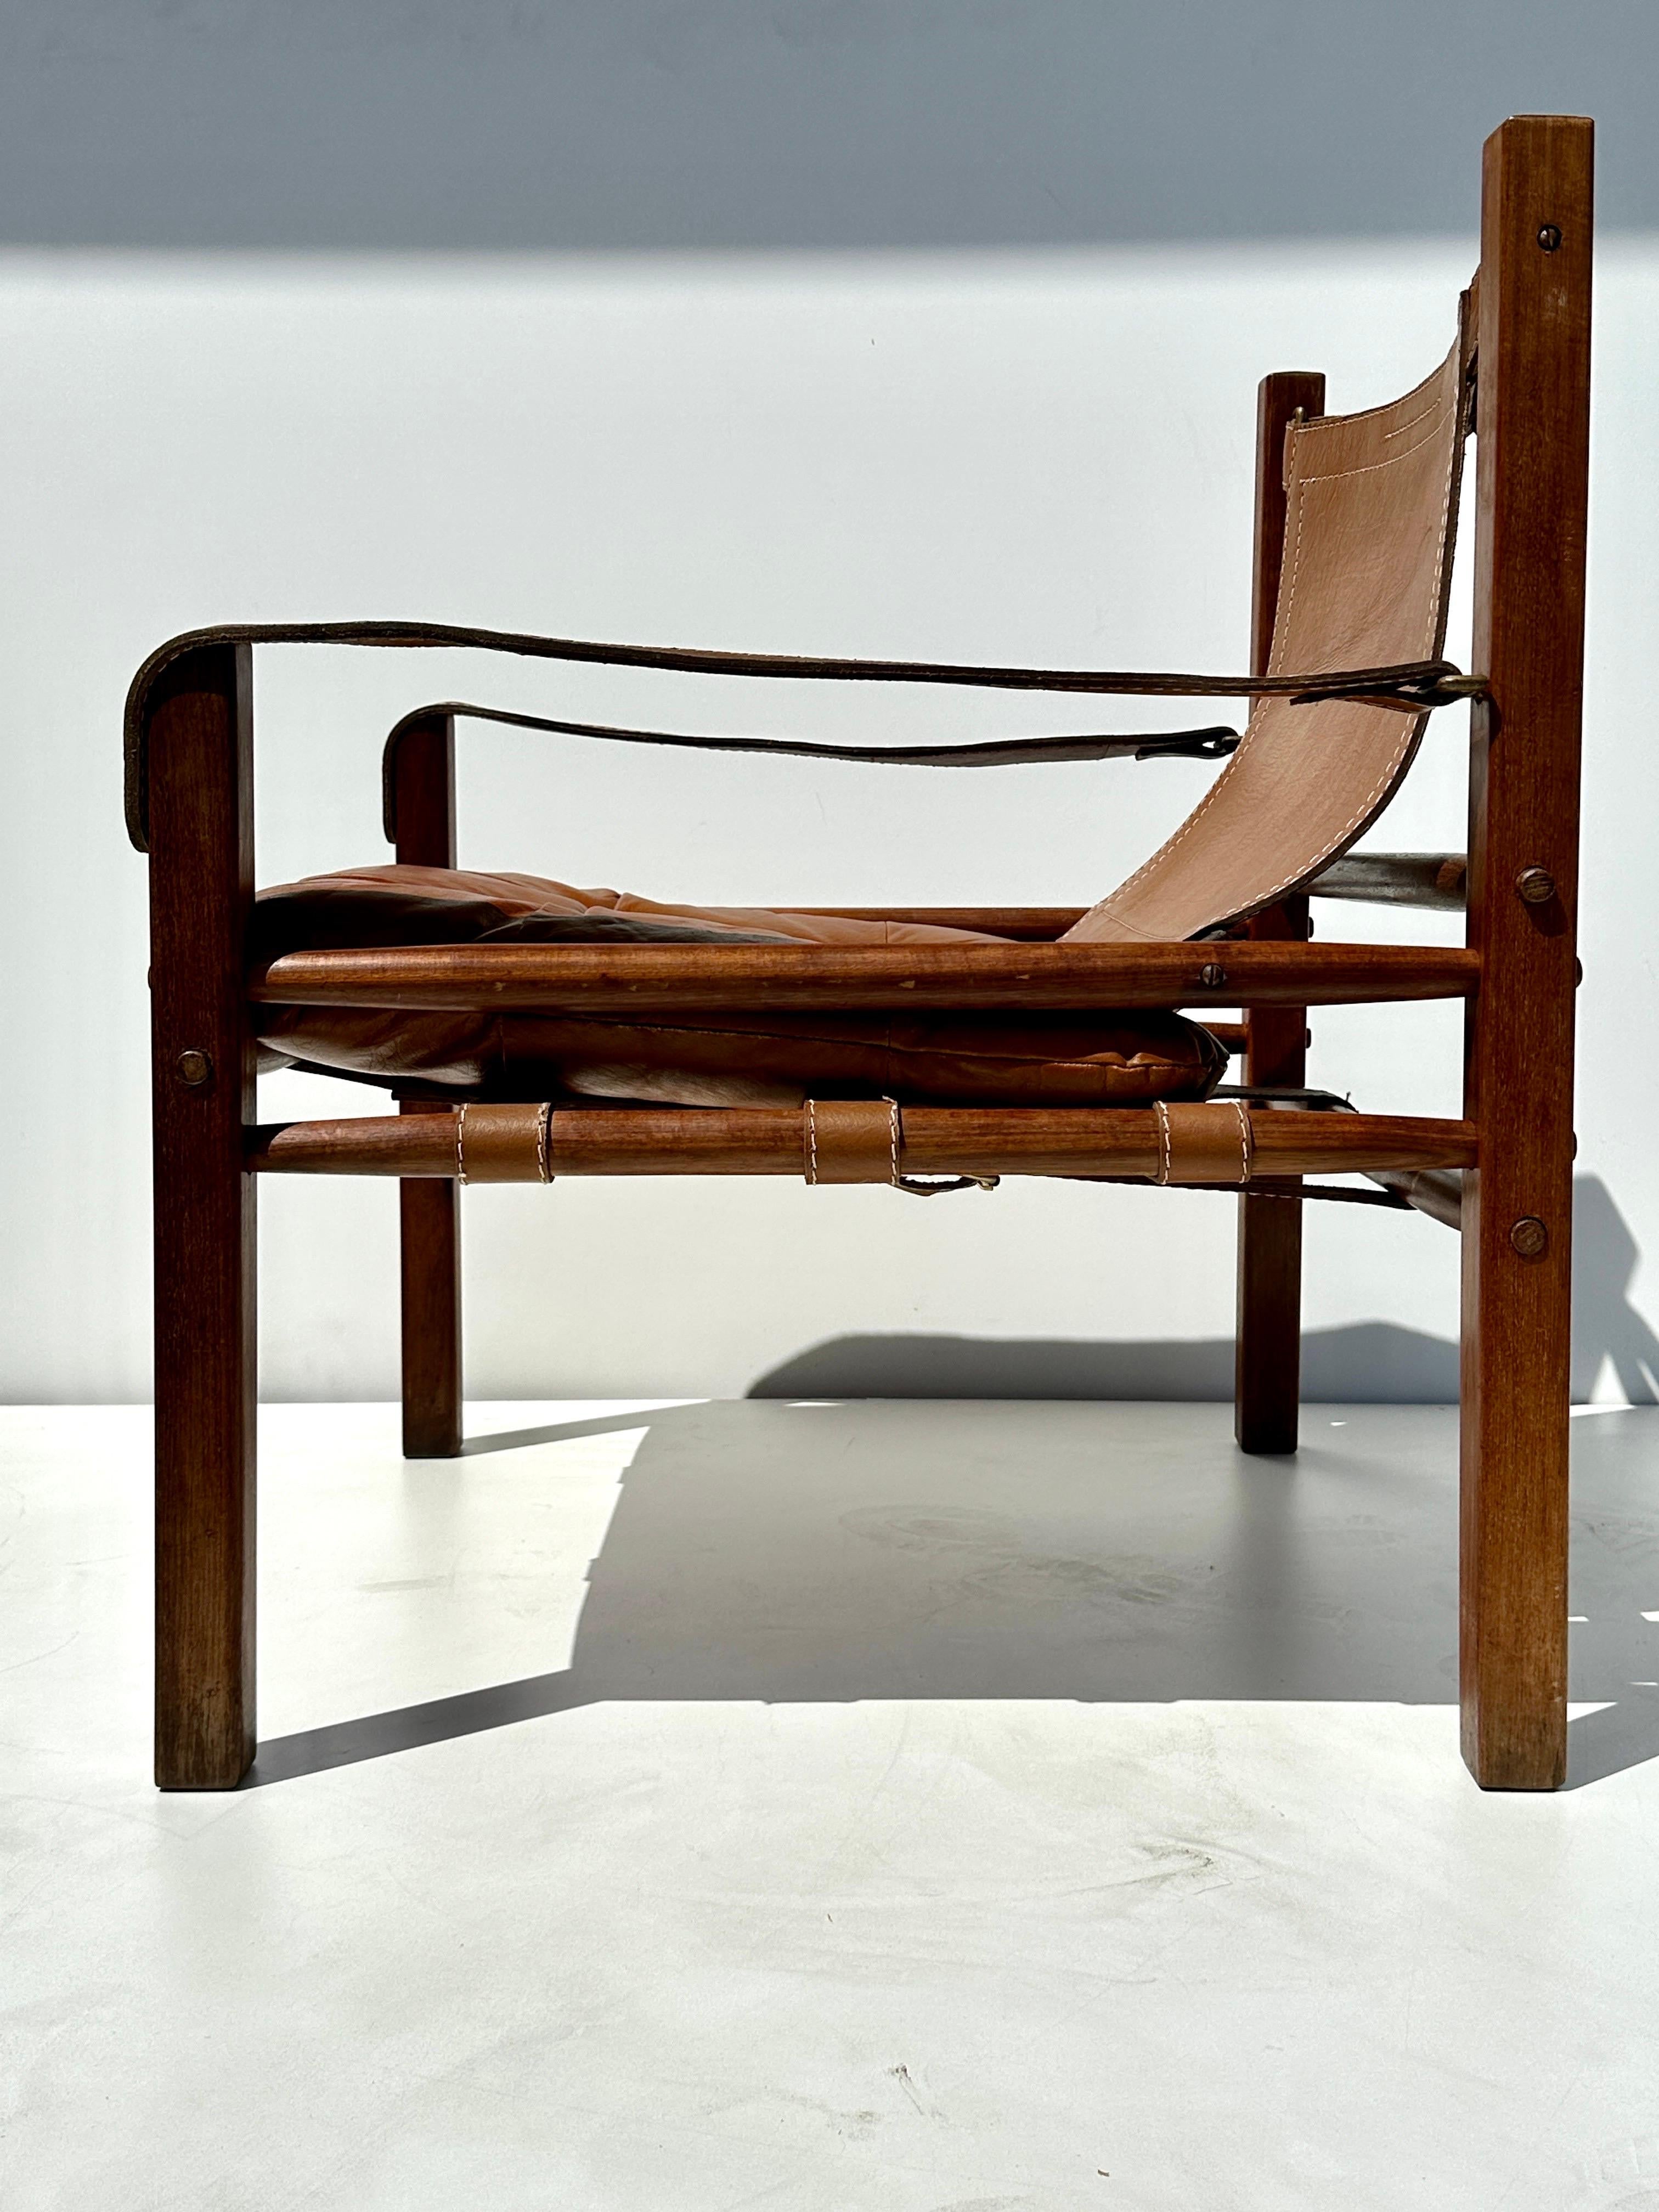 Arne Norell Sirocco teak and cognac leather safari chair for Scanform made in Colombia.